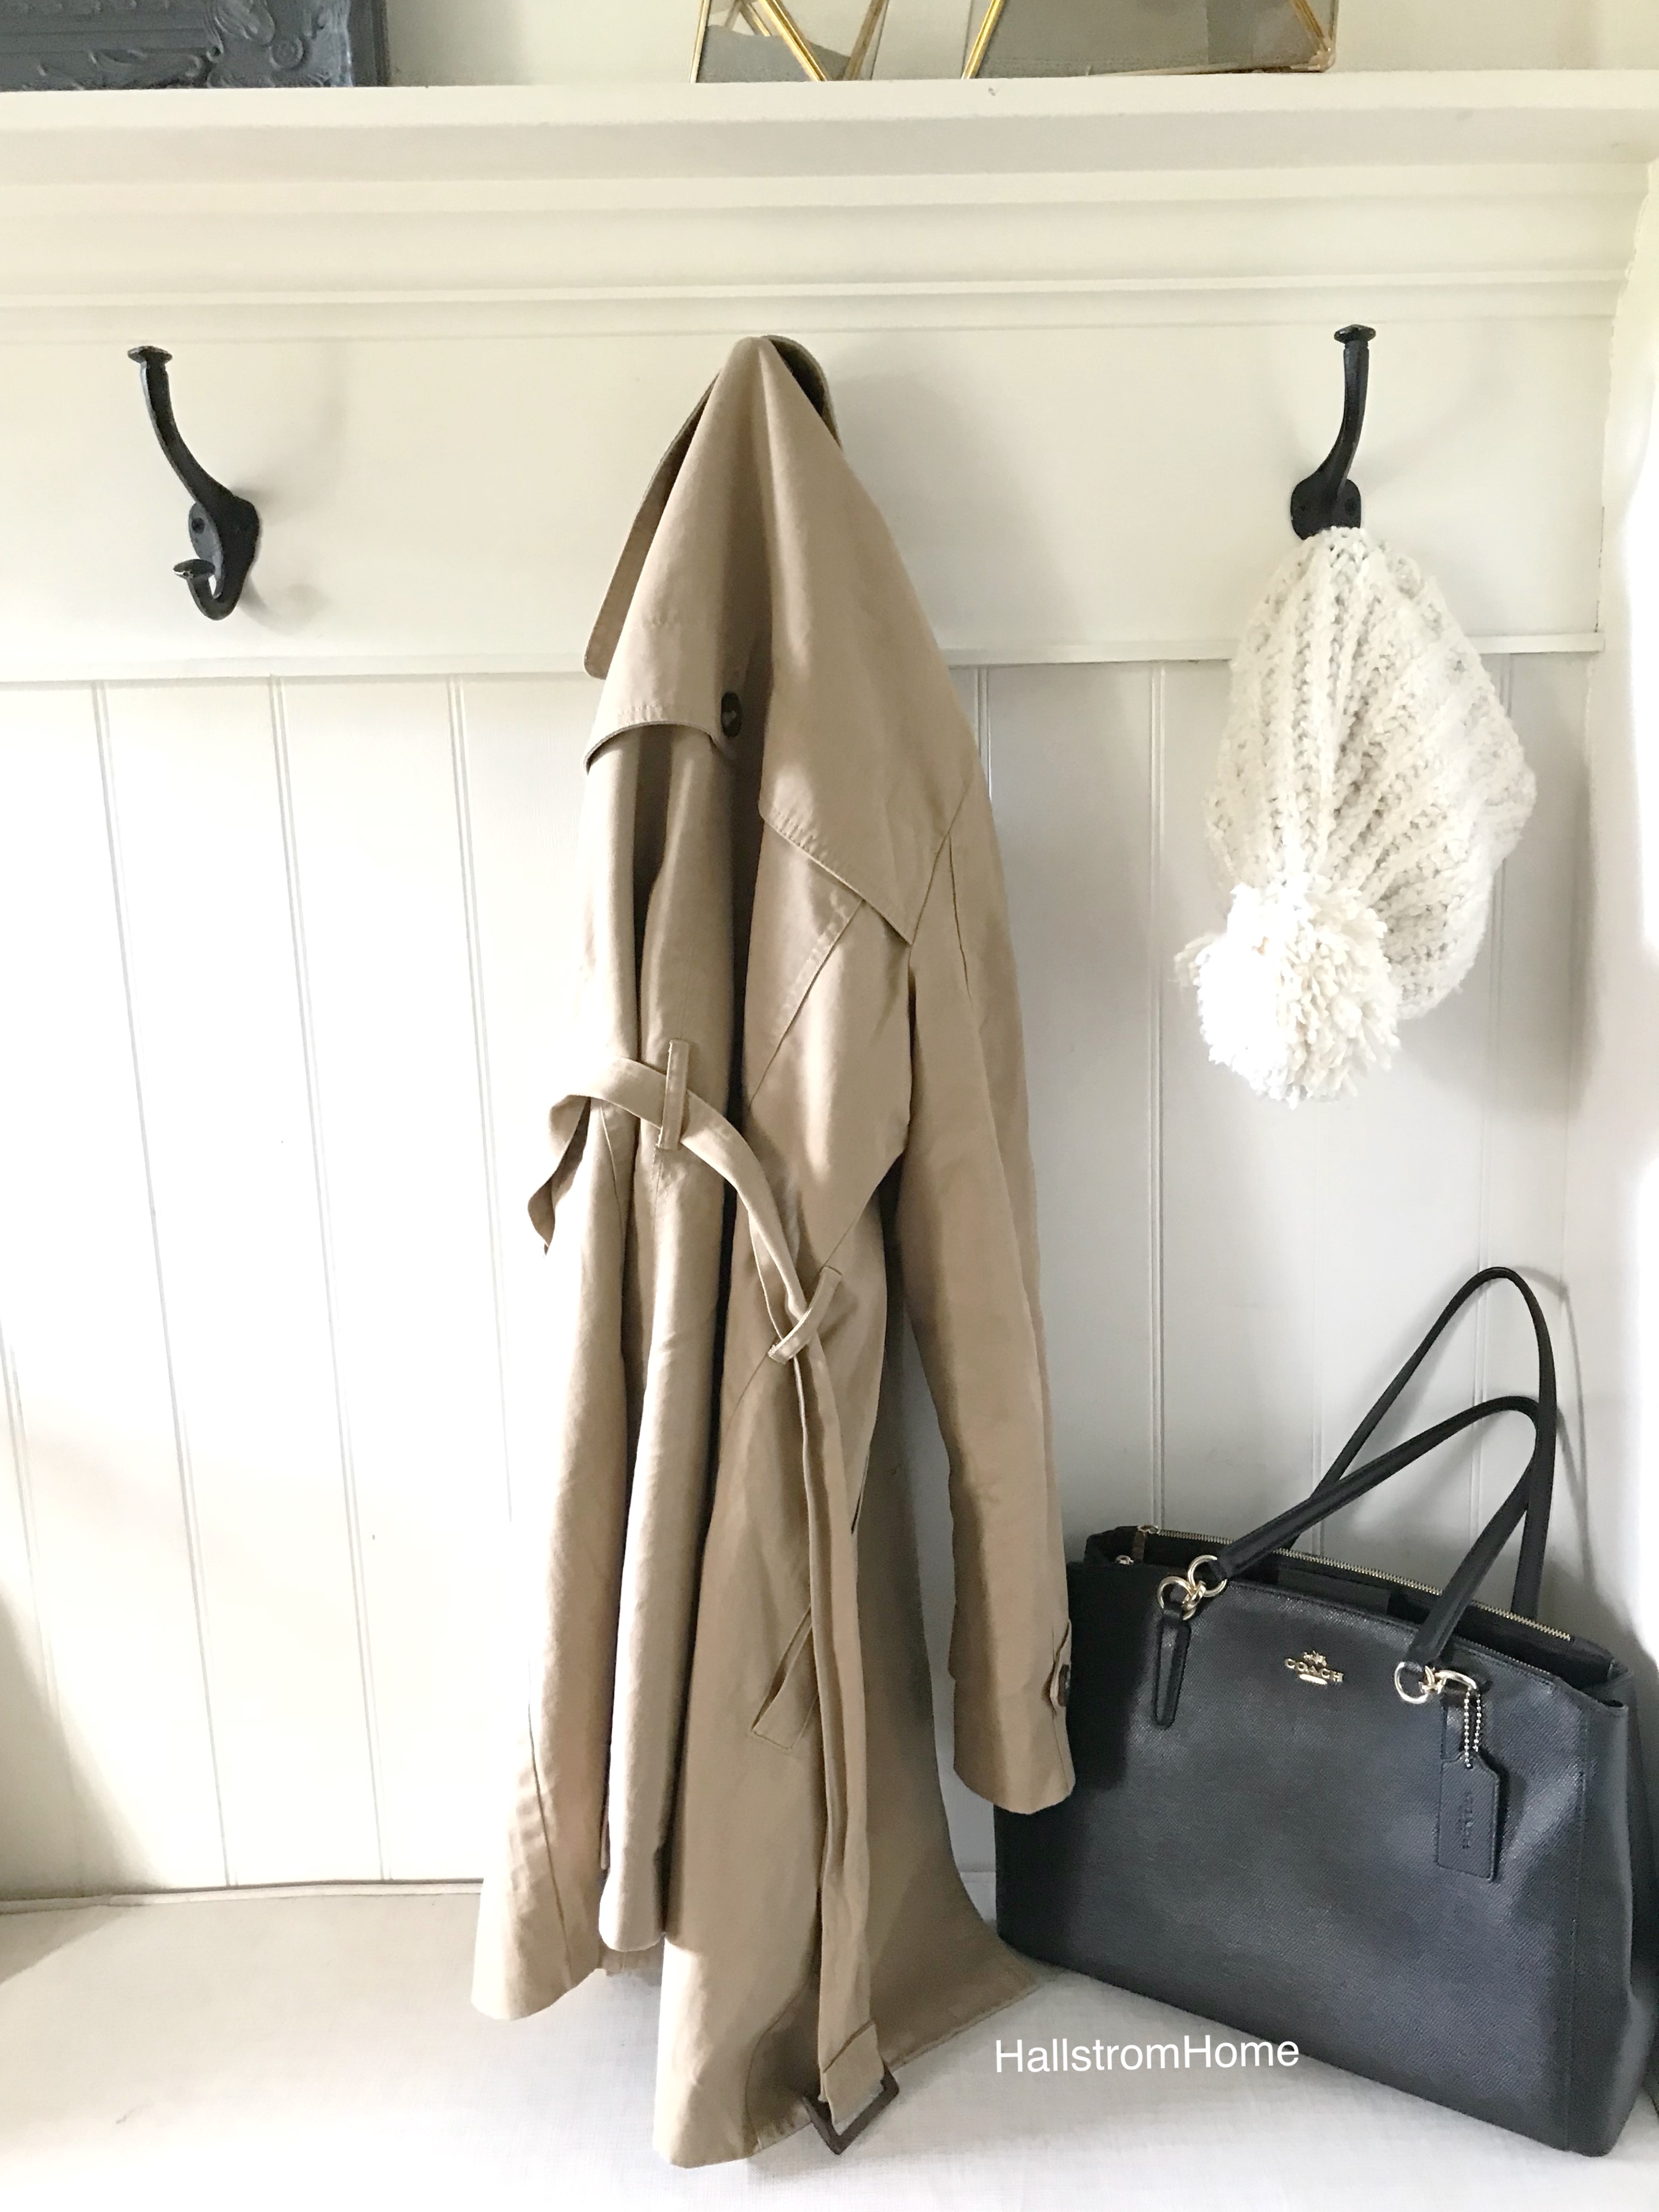 How I Updated the Mudroom for the New Year